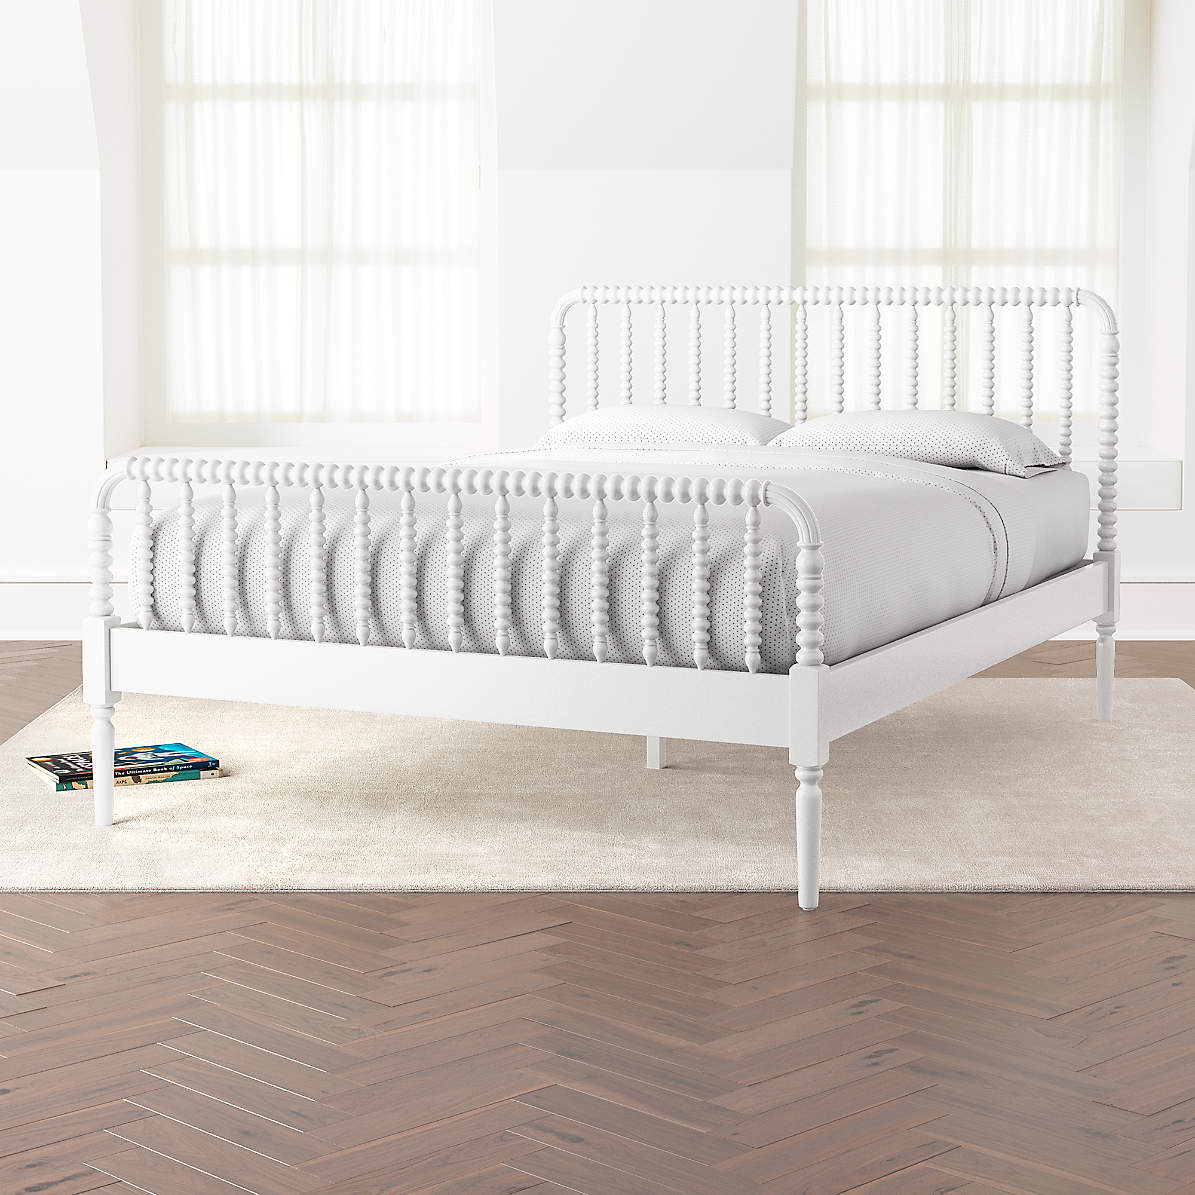 Jenny Lind White Queen Bed Reviews Crate And Barrel